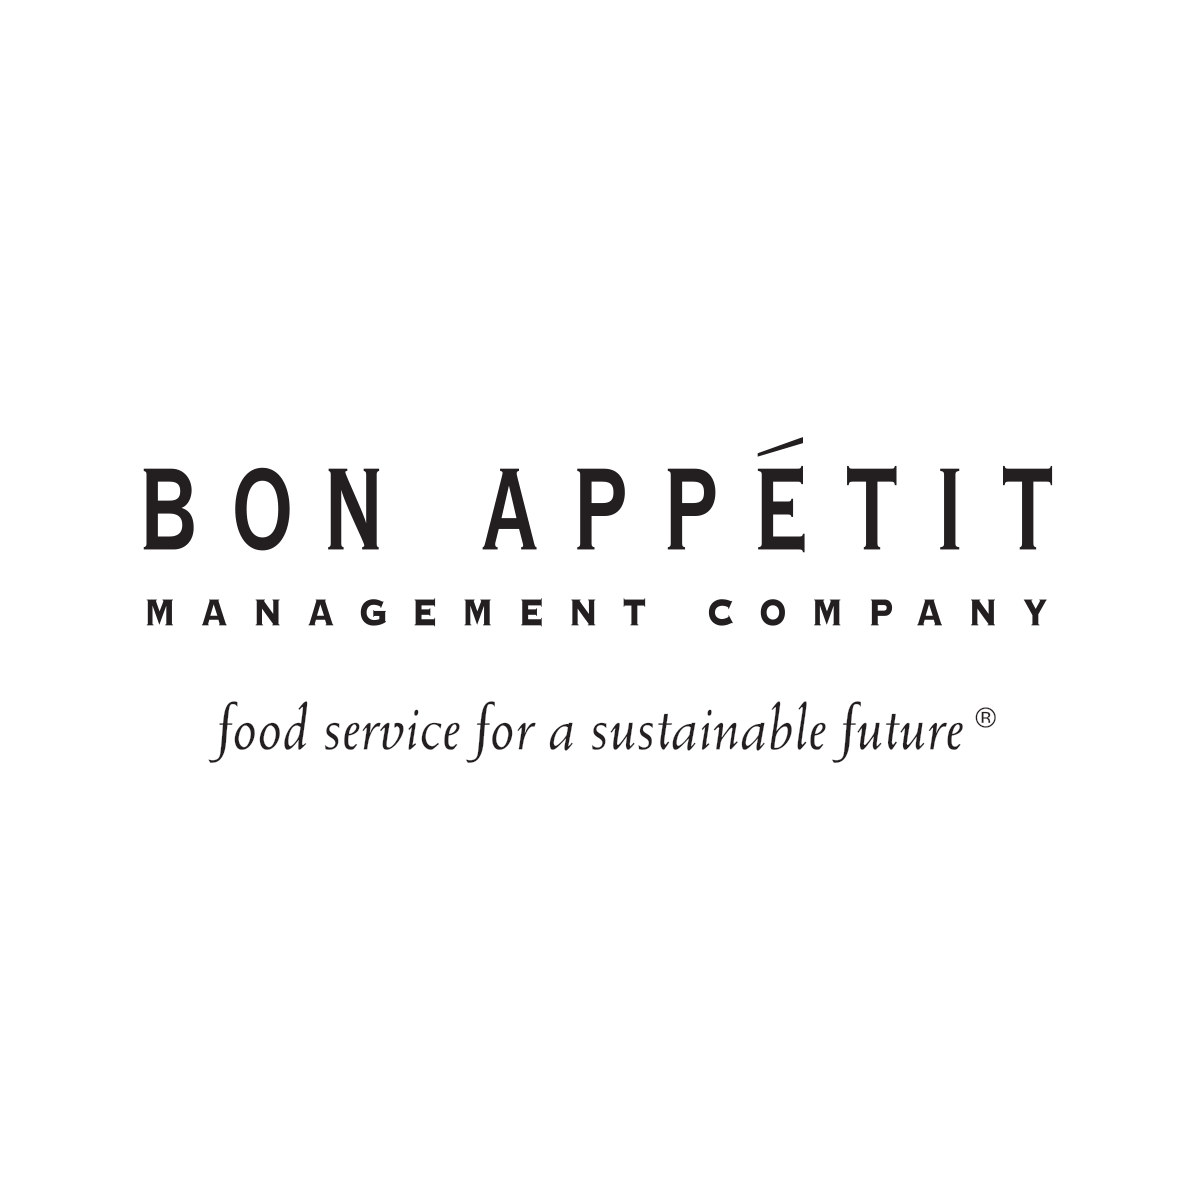 Bon Appetit Management Company and Inkling